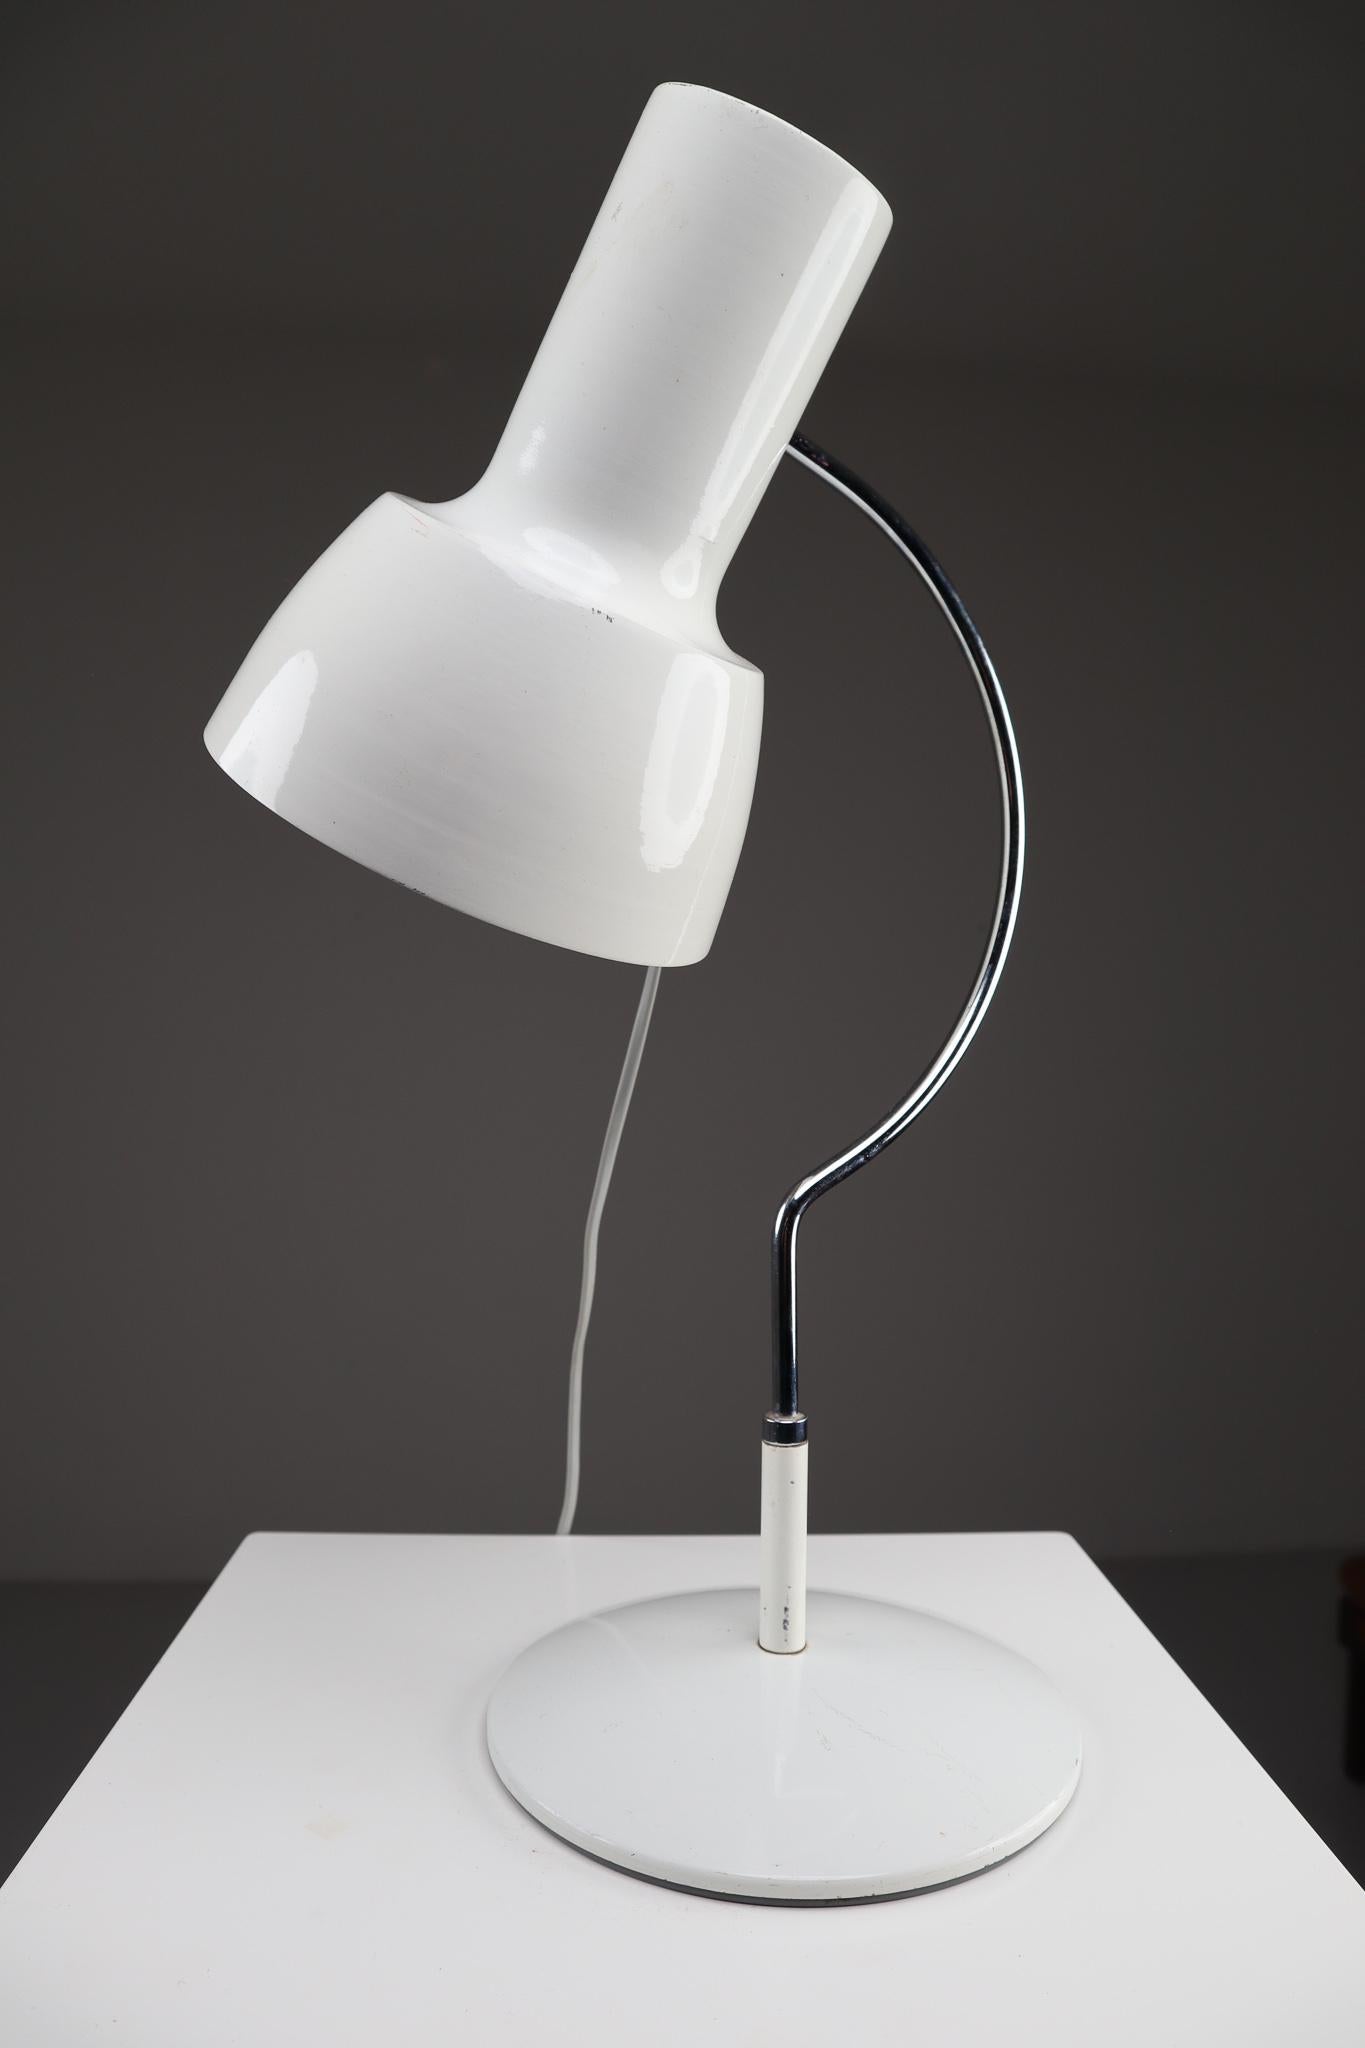 White midcentury table lamp was designed by Josef Hurka for Napako mid-1960s. This piece has been attributed based on archival documentation, such as vintage catalogs, designer records, or other literature sources. The lights are compatible with the